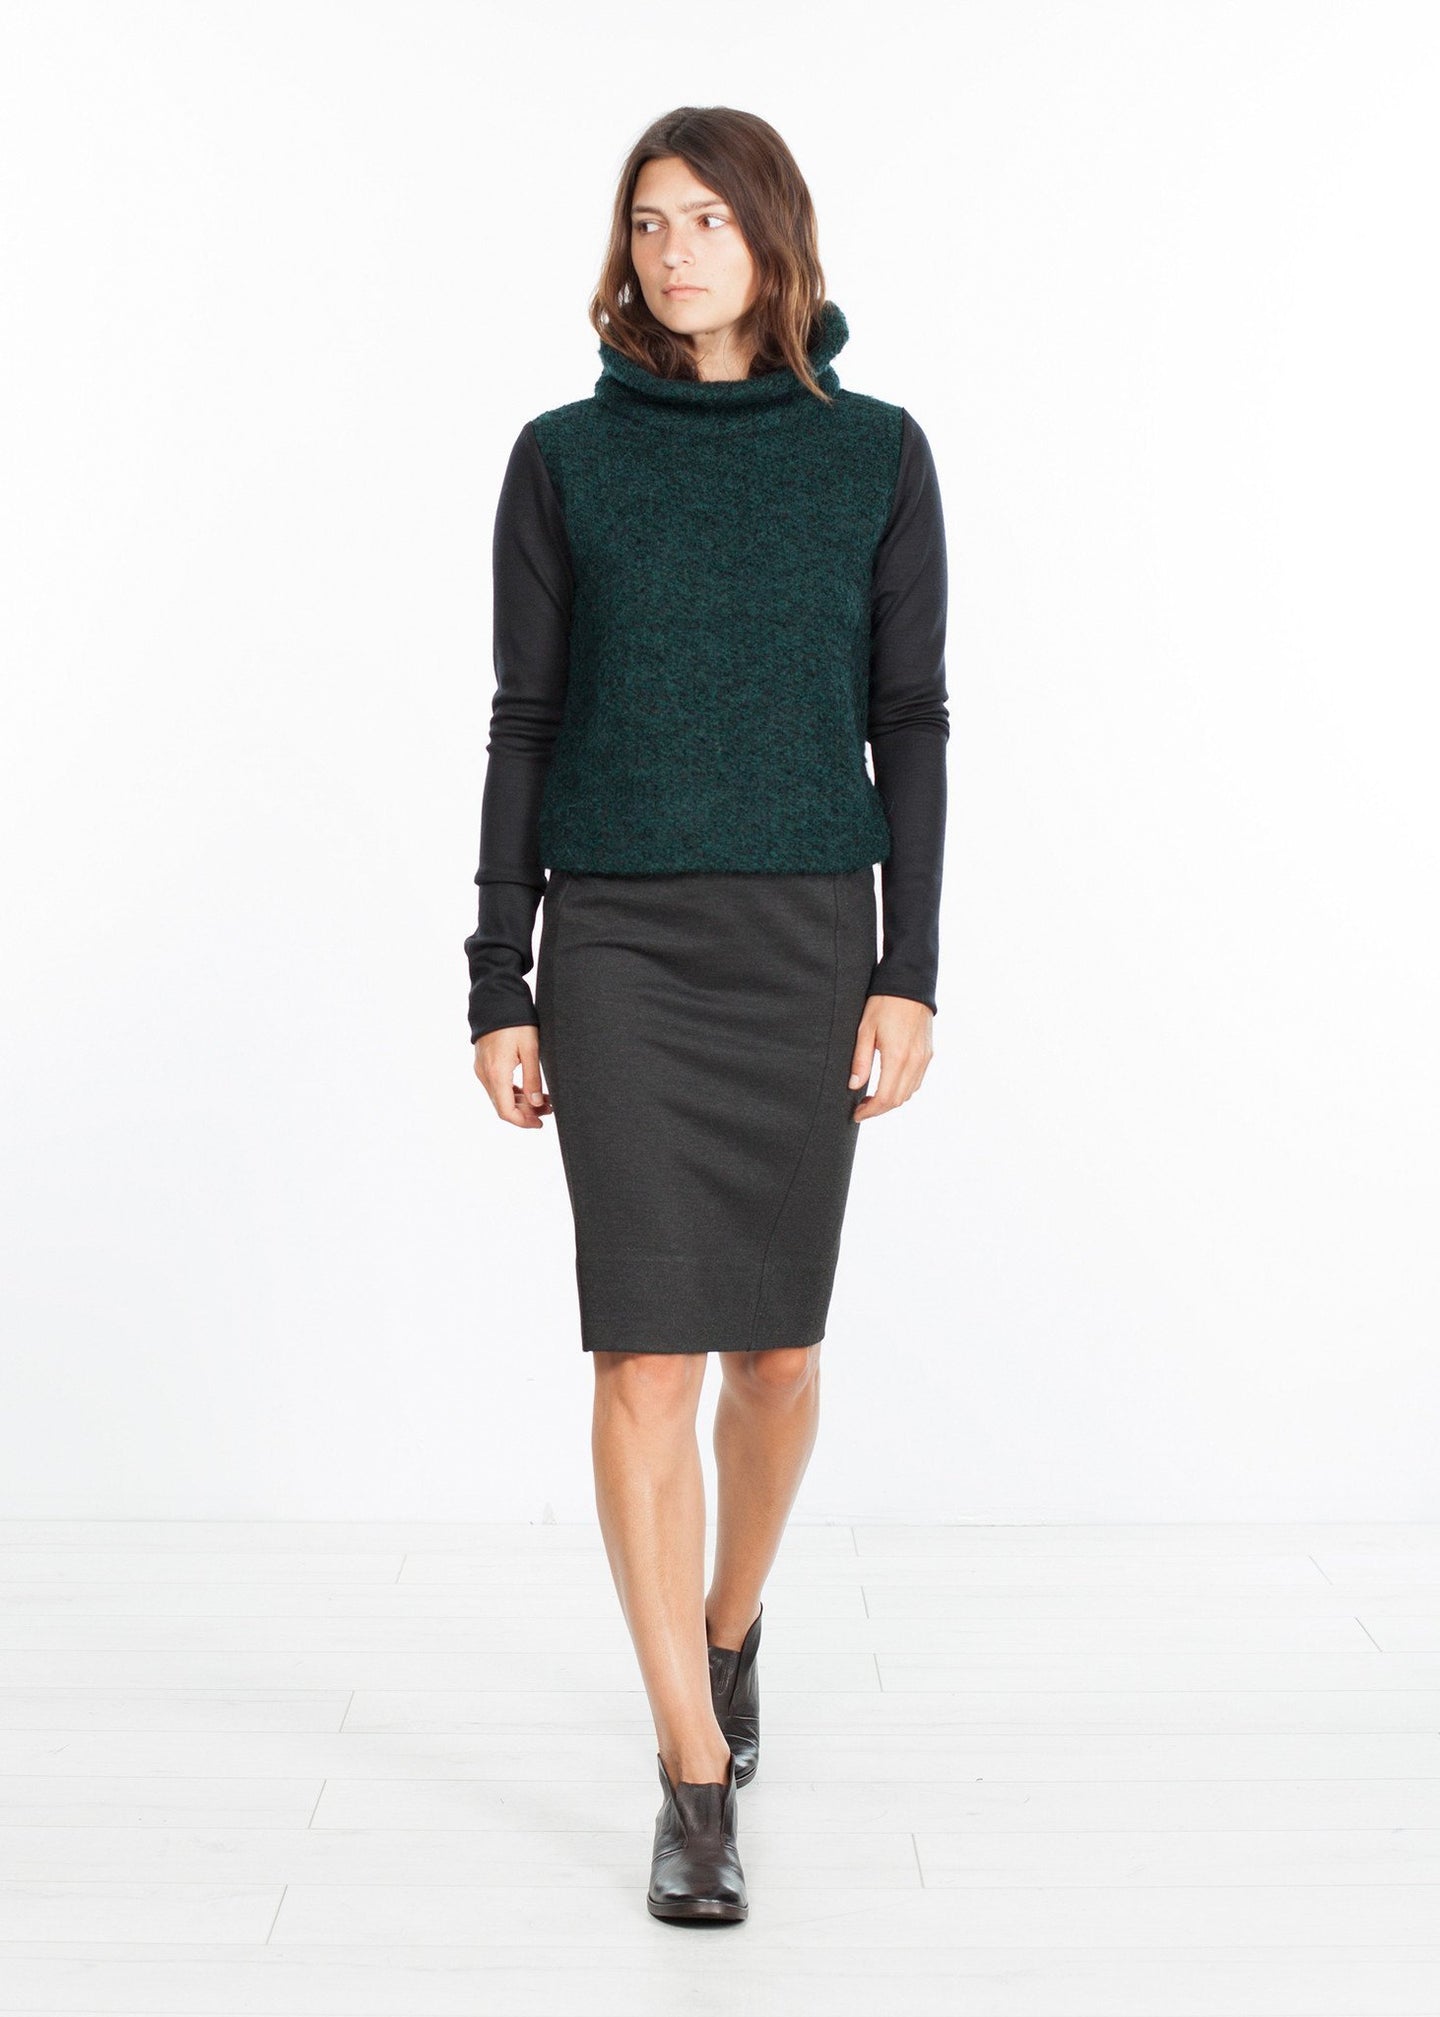 Boucle Turtle Neck in Green/Black